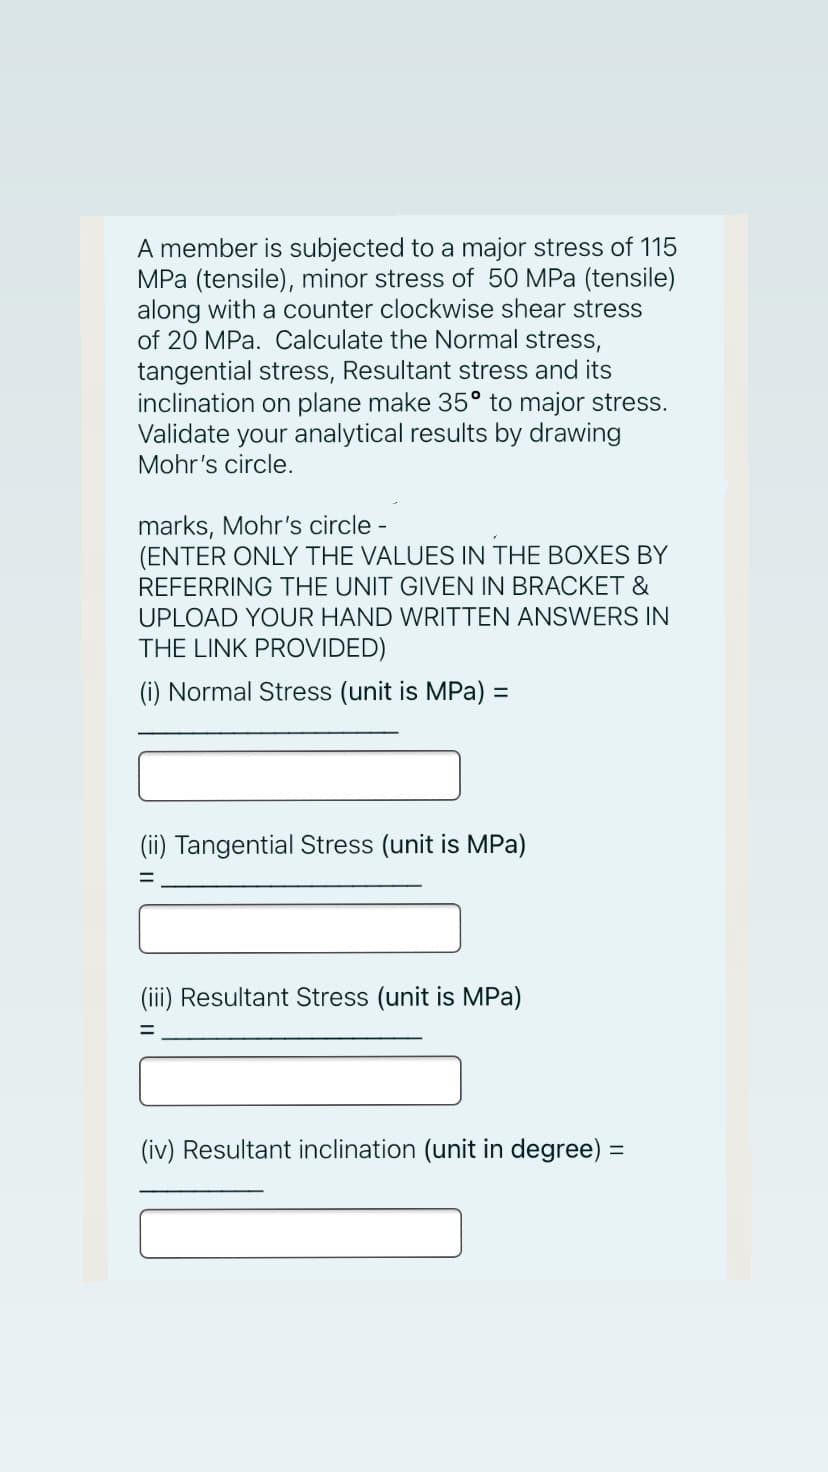 A member is subjected to a major stress of 115
MPa (tensile), minor stress of 50 MPa (tensile)
along with a counter clockwise shear stress
of 20 MPa. Calculate the Normal stress,
tangential stress, Resultant stress and its
inclination on plane make 35° to major stress.
Validate your analytical results by drawing
Mohr's circle.
marks, Mohr's circle -
(ENTER ONLY THE VALUES IN THE BOXES BY
REFERRING THE UNIT GIVEN IN BRACKET &
UPLOAD YOUR HAND WRITTEN ANSWERS IN
THE LINK PROVIDED)
(i) Normal Stress (unit is MPa) =
(ii) Tangential Stress (unit is MPa)
(iii) Resultant Stress (unit is MPa)
(iv) Resultant inclination (unit in degree) =
%3D
